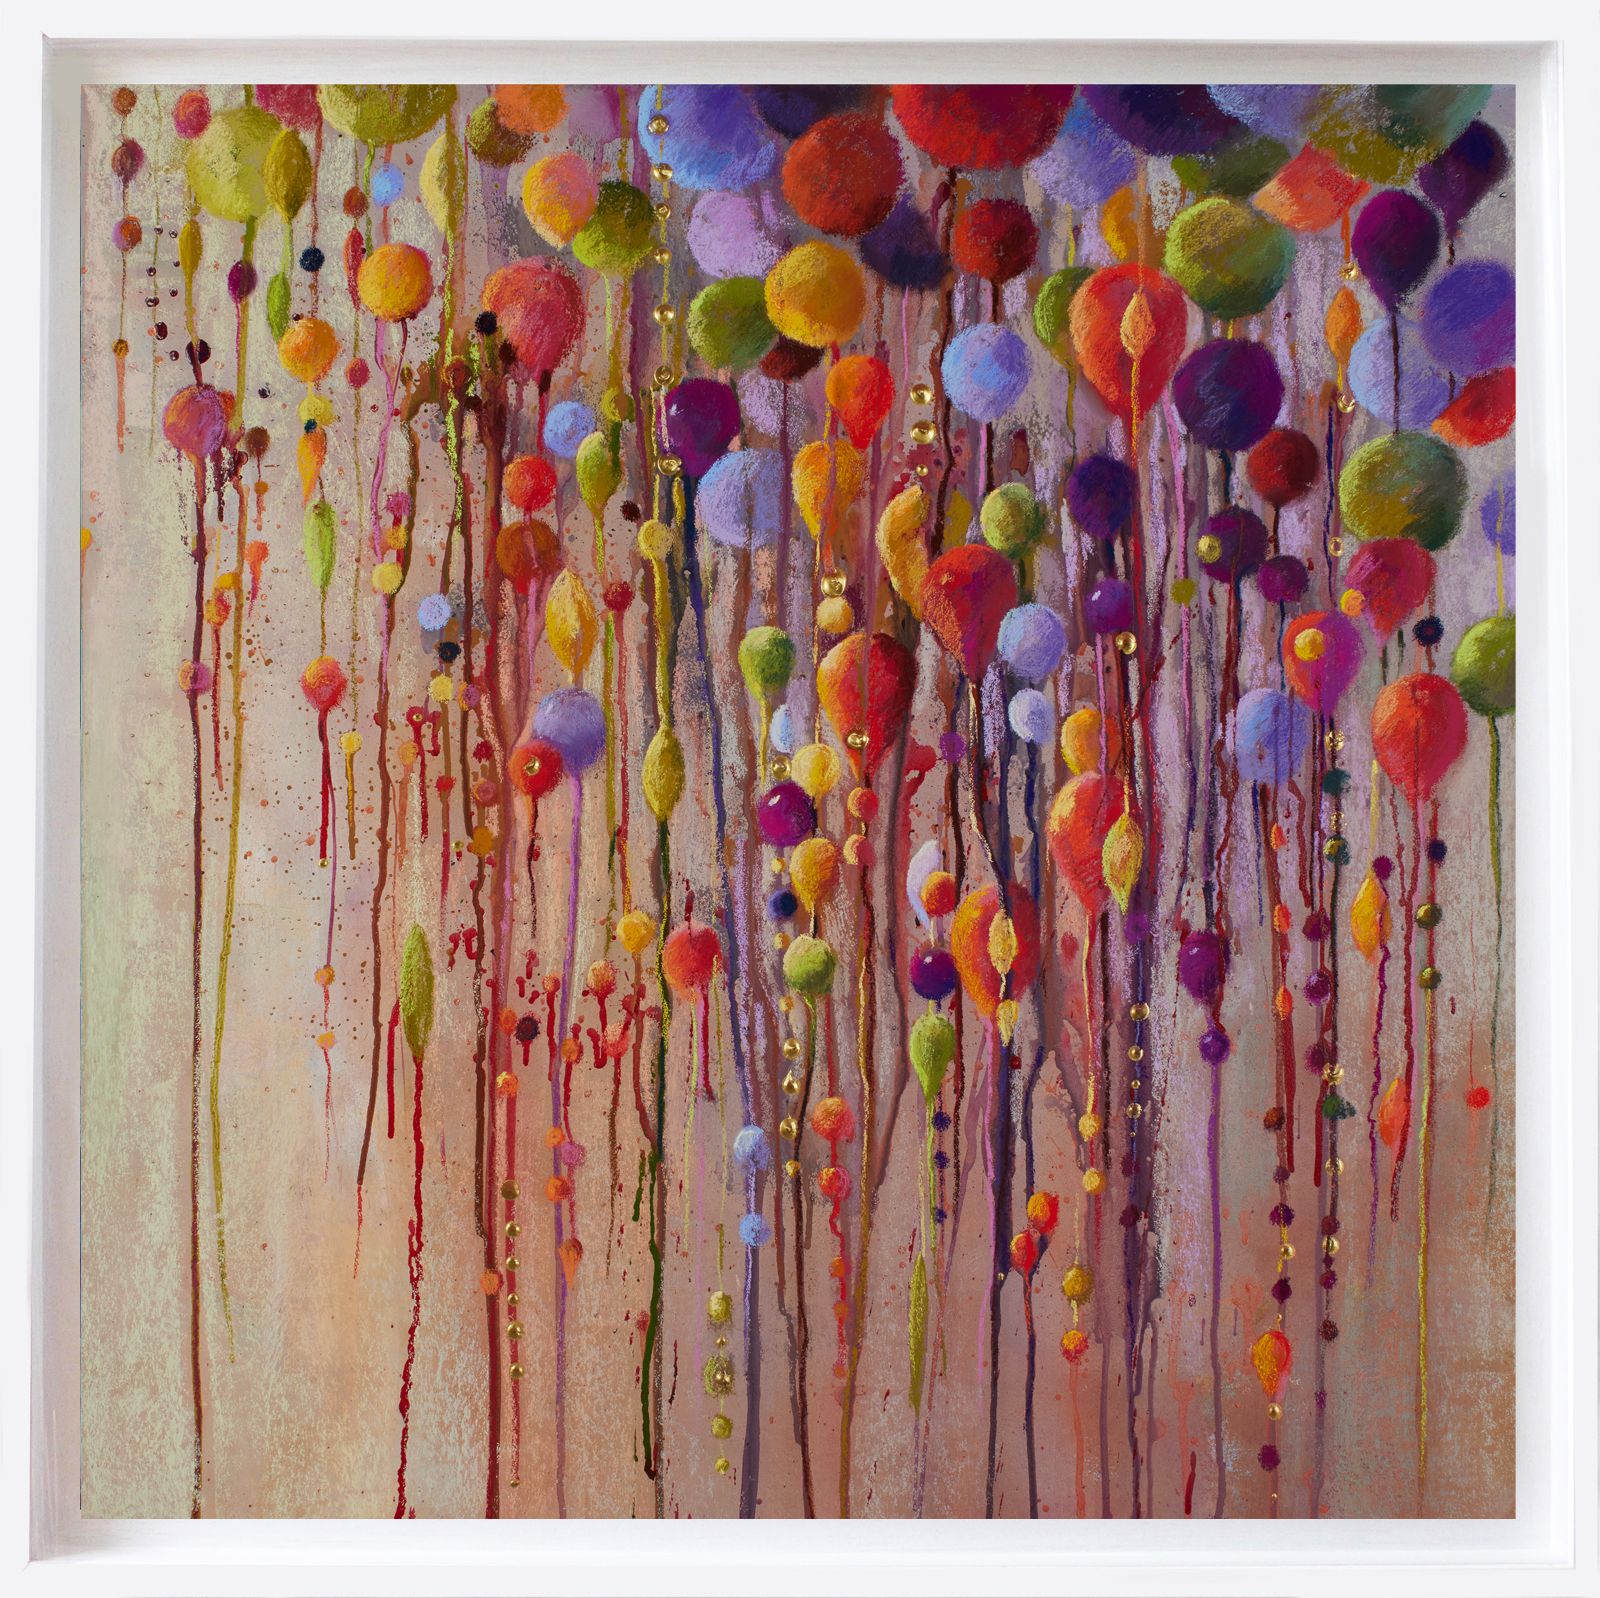 99 Red Balloons by Nel Whatmore